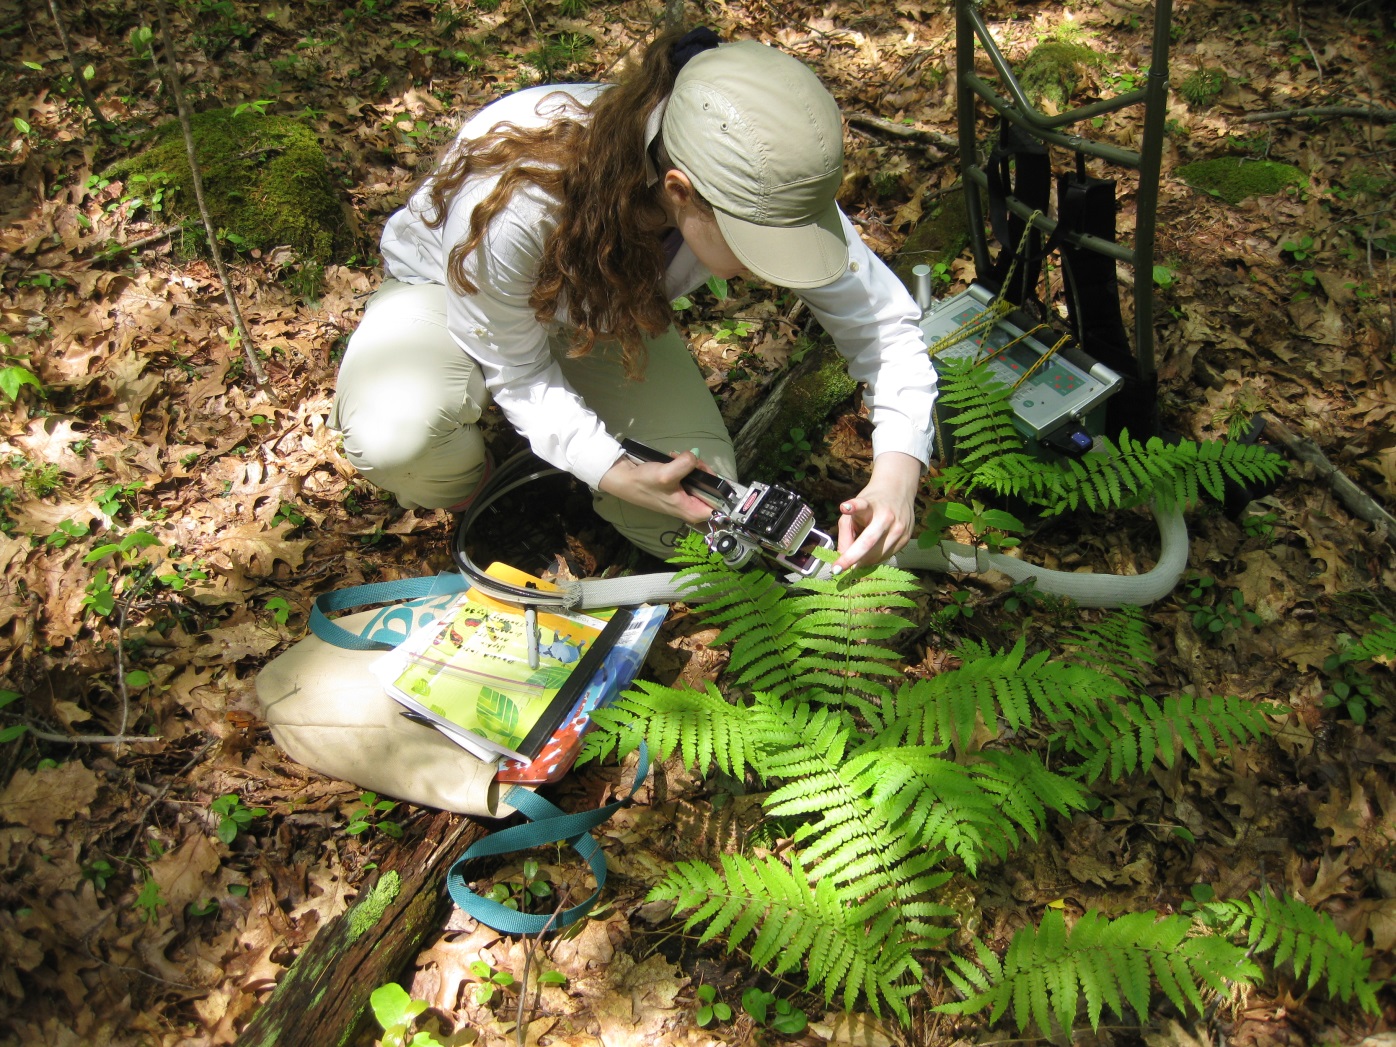 [Measuring a cinnamon fern in one of the plots using the Li-Cor 6400XT Portable Photosynthesis System.]